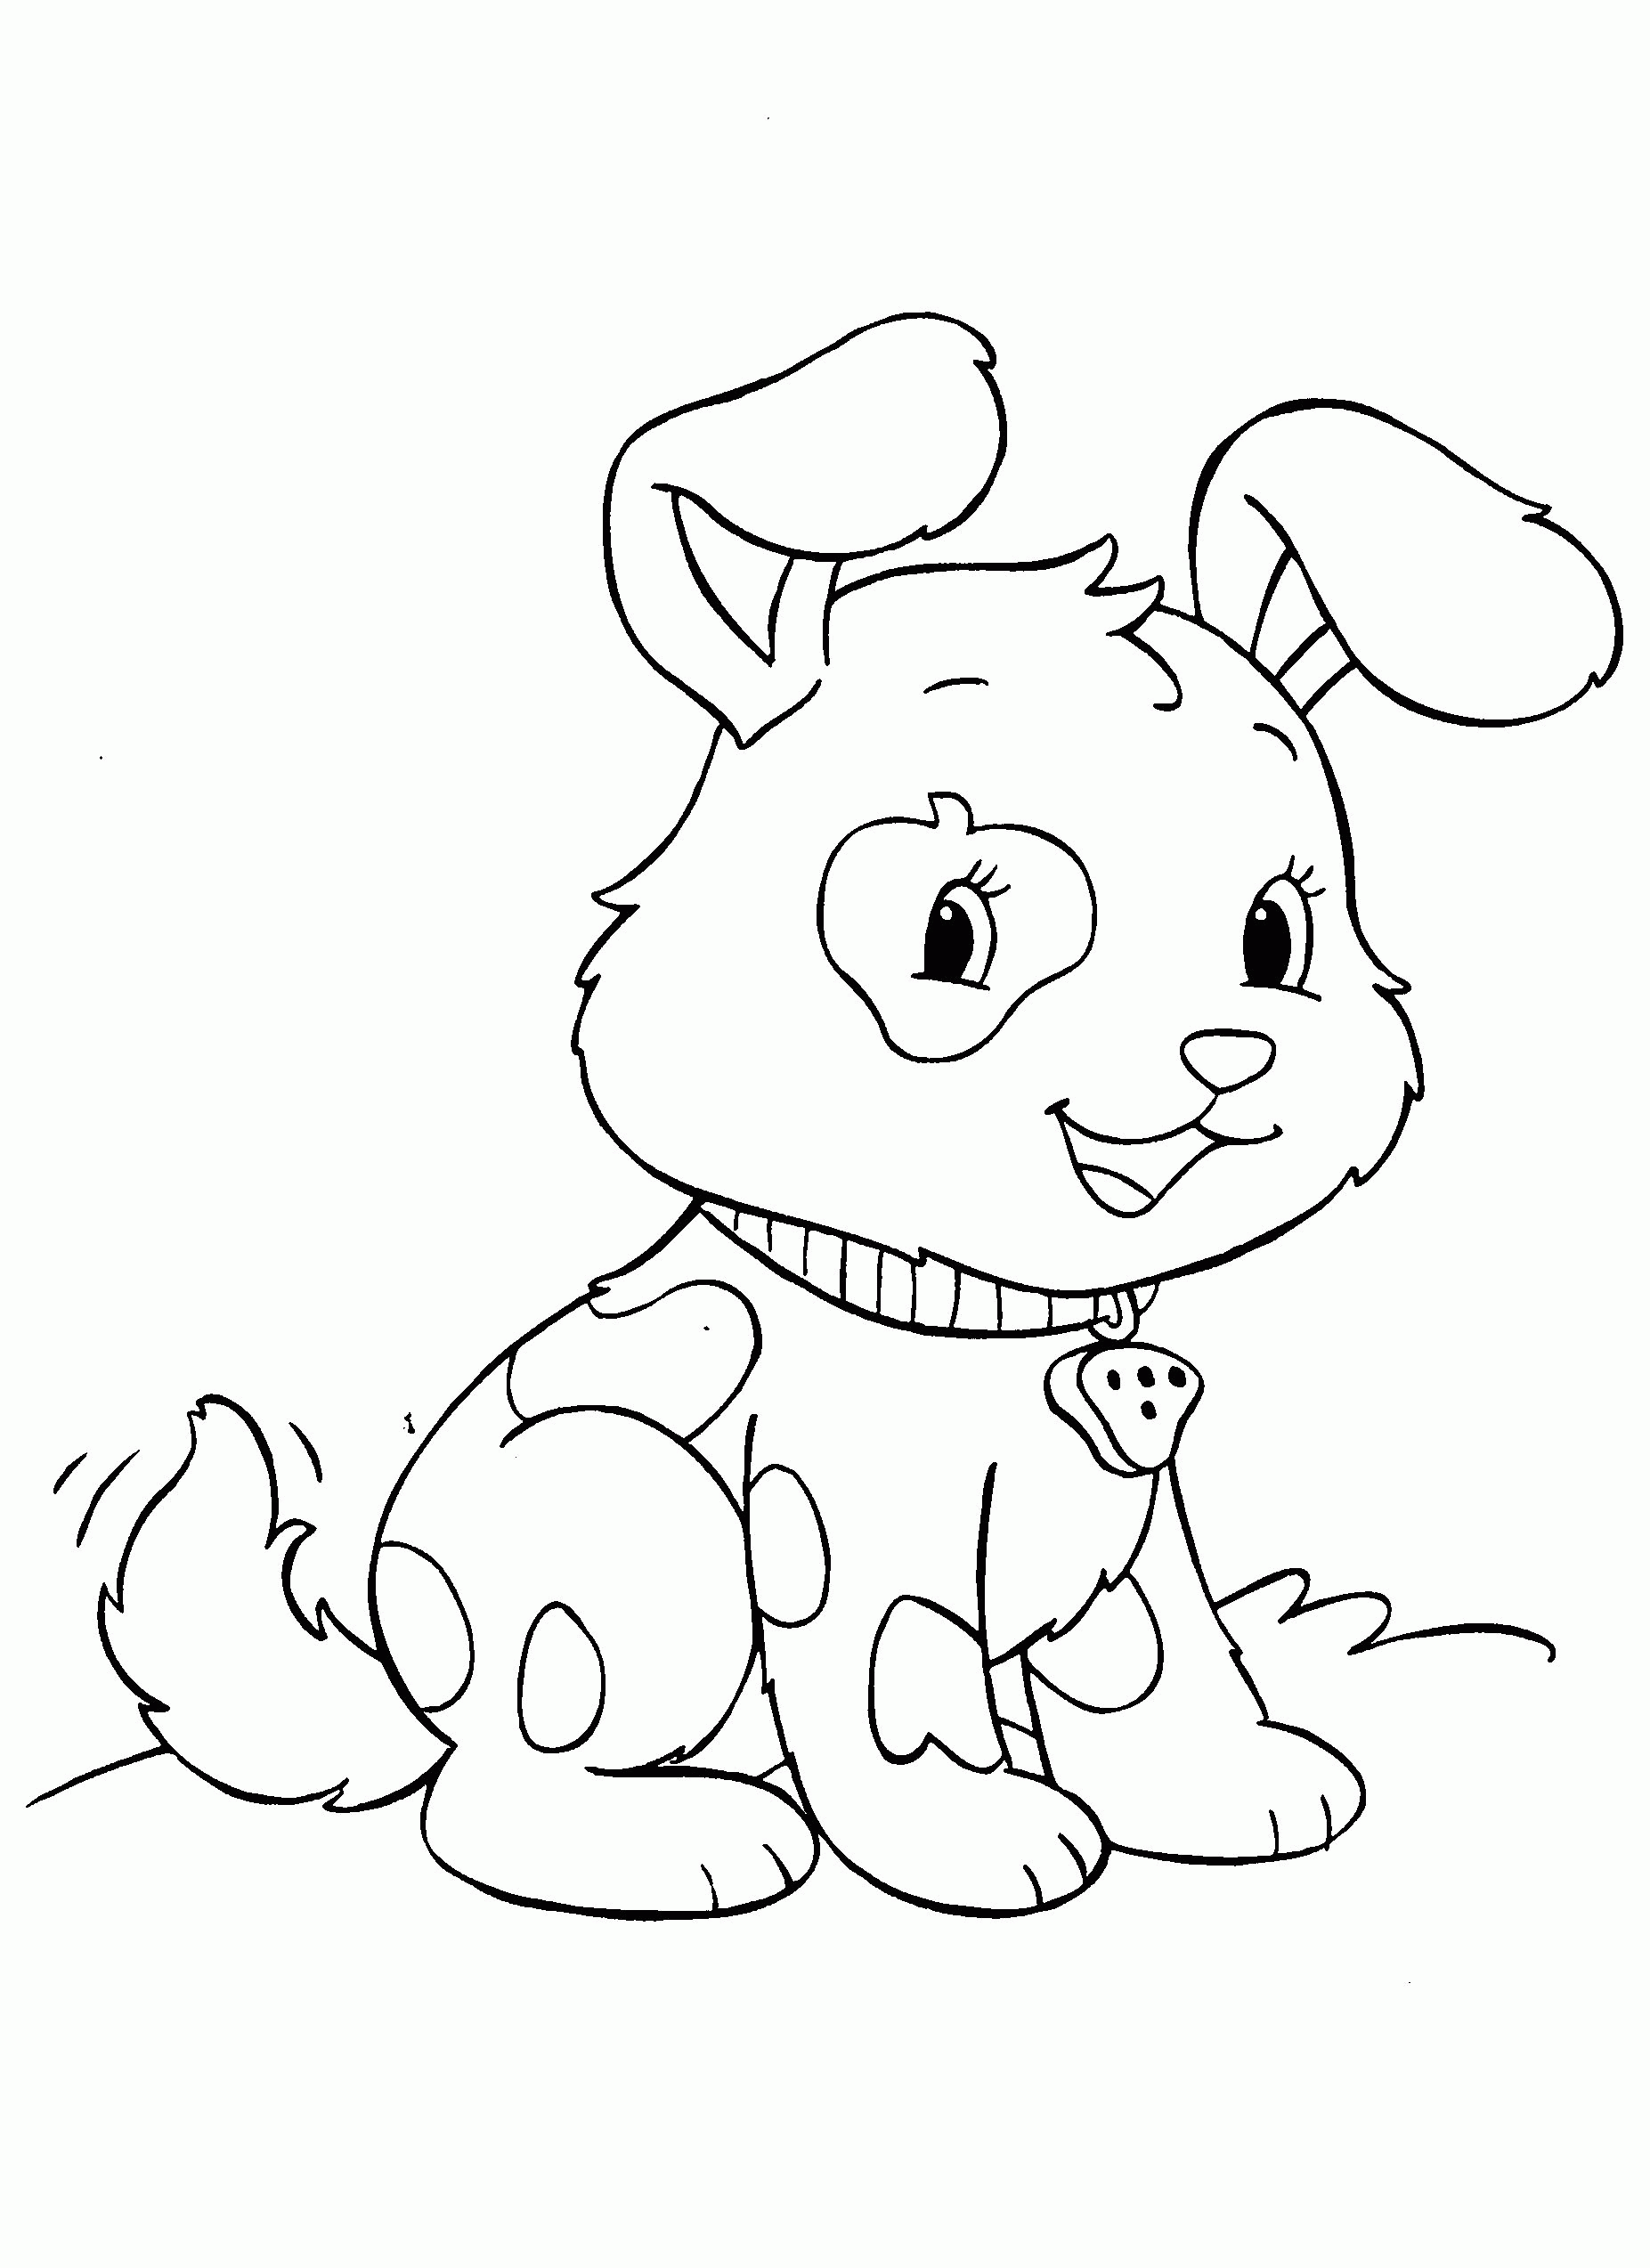 15 Free Pictures for: Puppies Coloring Pages. Temoon.us